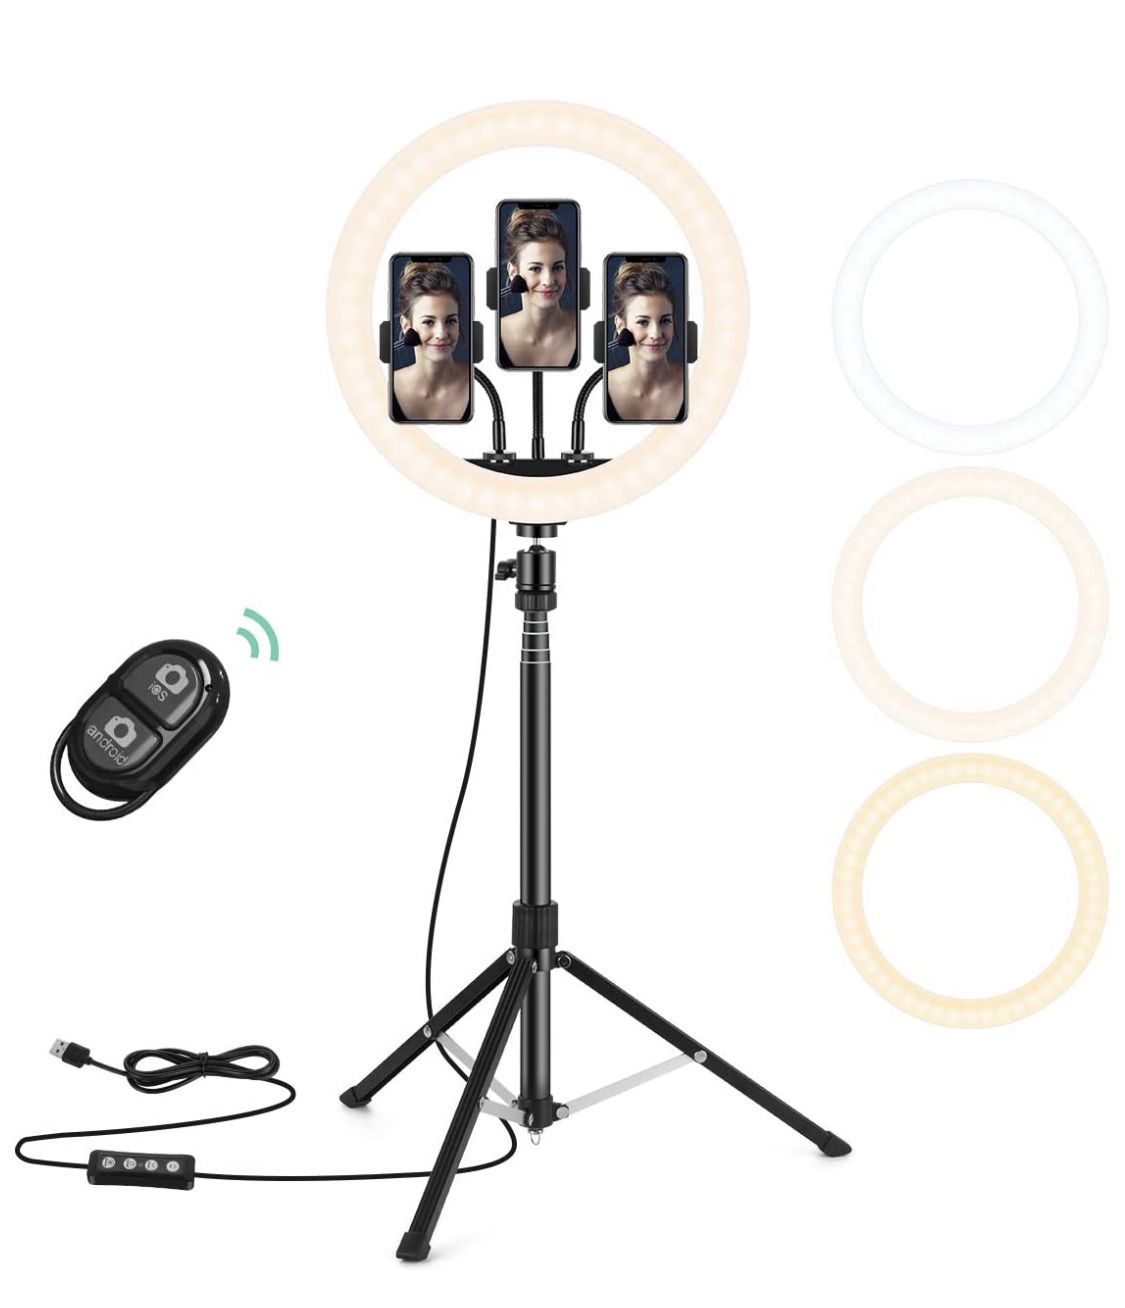 12" Selfie Ring Light with 3 Color Modes, 10 Adjustable Brightness, 63“ Extendable Tripod Stand, 3 Phone Holders, Bluetooth Remote Shutter for Photogr